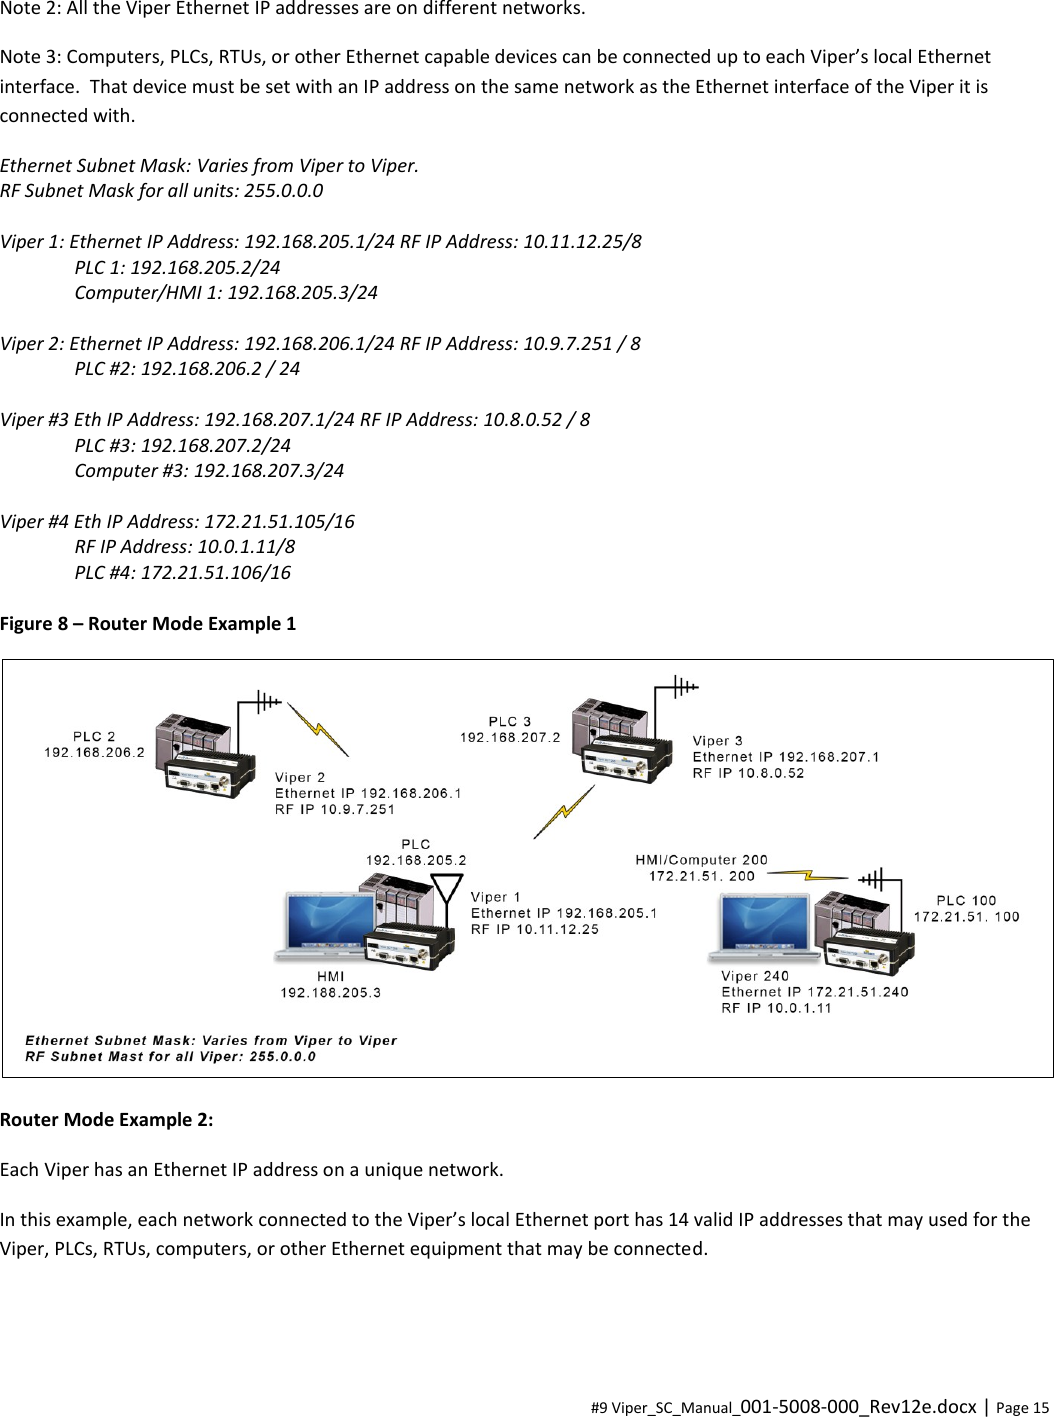  #9 Viper_SC_Manual_001-5008-000_Rev12e.docx | Page 15 Note 2: All the Viper Ethernet IP addresses are on different networks. Note 3: Computers, PLCs, RTUs, or other Ethernet capable devices can be connected up to each Viper’s local Ethernet interface.  That device must be set with an IP address on the same network as the Ethernet interface of the Viper it is connected with. Ethernet Subnet Mask: Varies from Viper to Viper. RF Subnet Mask for all units: 255.0.0.0  Viper 1: Ethernet IP Address: 192.168.205.1/24 RF IP Address: 10.11.12.25/8 PLC 1: 192.168.205.2/24 Computer/HMI 1: 192.168.205.3/24  Viper 2: Ethernet IP Address: 192.168.206.1/24 RF IP Address: 10.9.7.251 / 8 PLC #2: 192.168.206.2 / 24  Viper #3 Eth IP Address: 192.168.207.1/24 RF IP Address: 10.8.0.52 / 8   PLC #3: 192.168.207.2/24   Computer #3: 192.168.207.3/24  Viper #4 Eth IP Address: 172.21.51.105/16 RF IP Address: 10.0.1.11/8   PLC #4: 172.21.51.106/16  Figure 8 – Router Mode Example 1  Router Mode Example 2:  Each Viper has an Ethernet IP address on a unique network. In this example, each network connected to the Viper’s local Ethernet port has 14 valid IP addresses that may used for the Viper, PLCs, RTUs, computers, or other Ethernet equipment that may be connected. 